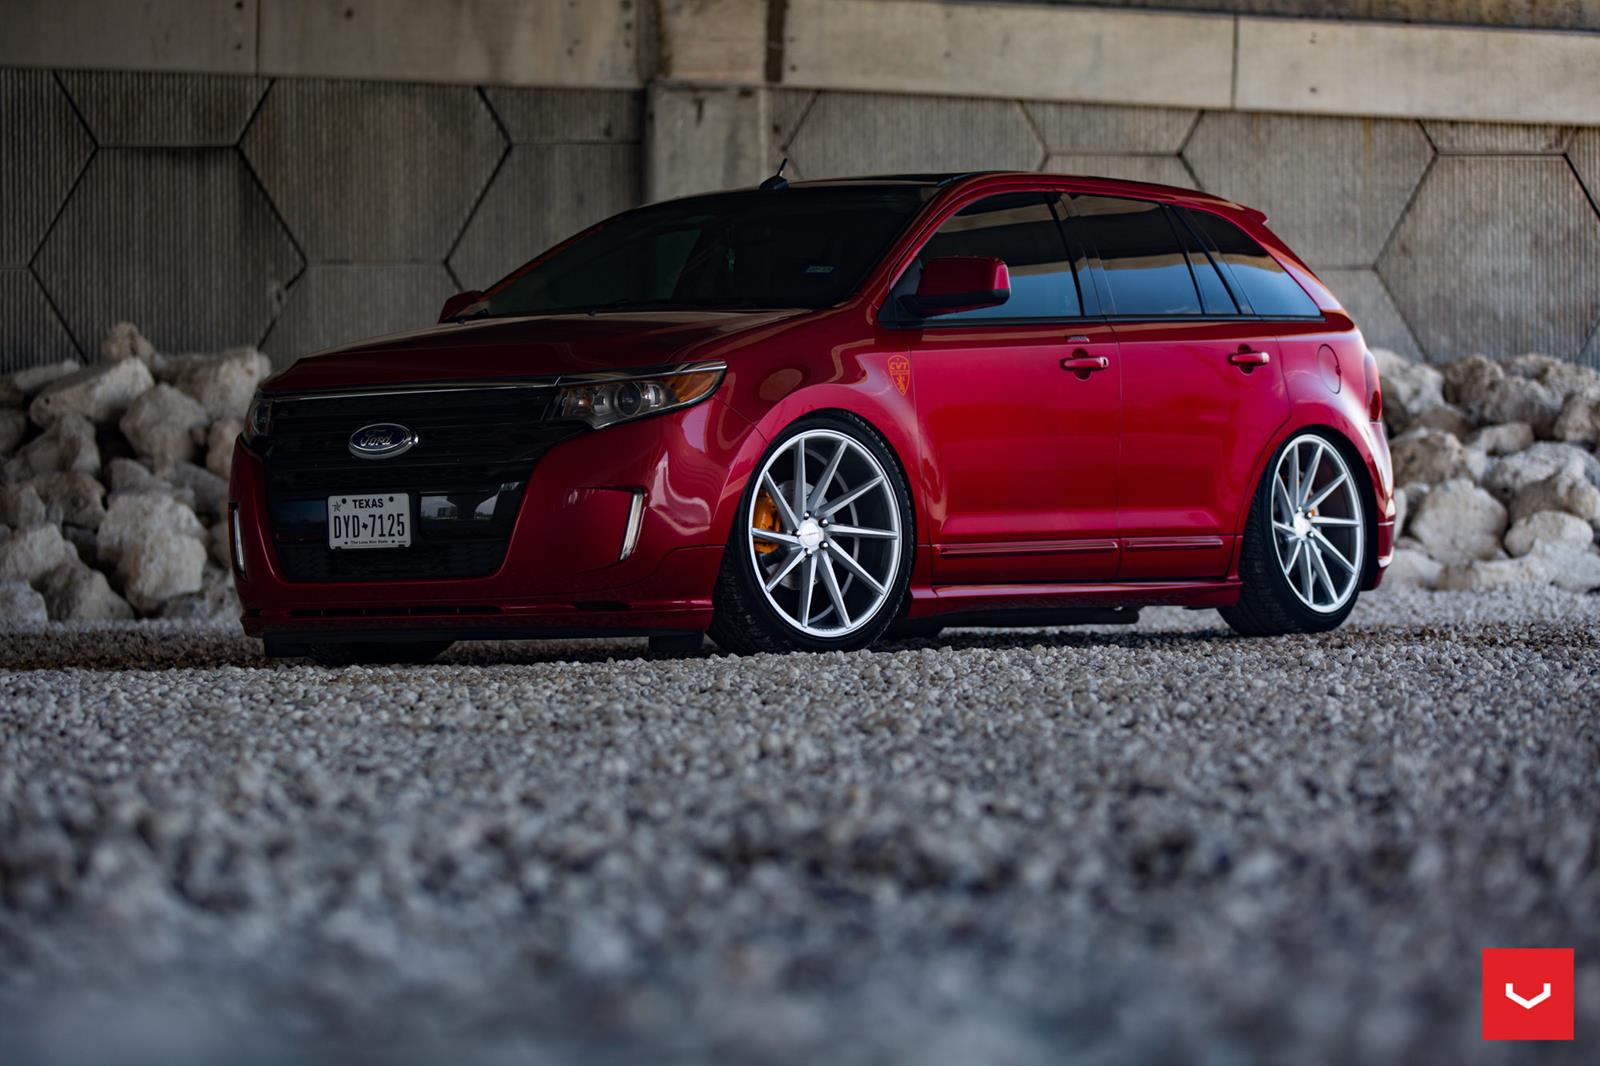 red-ford-edge-suv-vossen-cvt-directional-concave-wheels.jpg